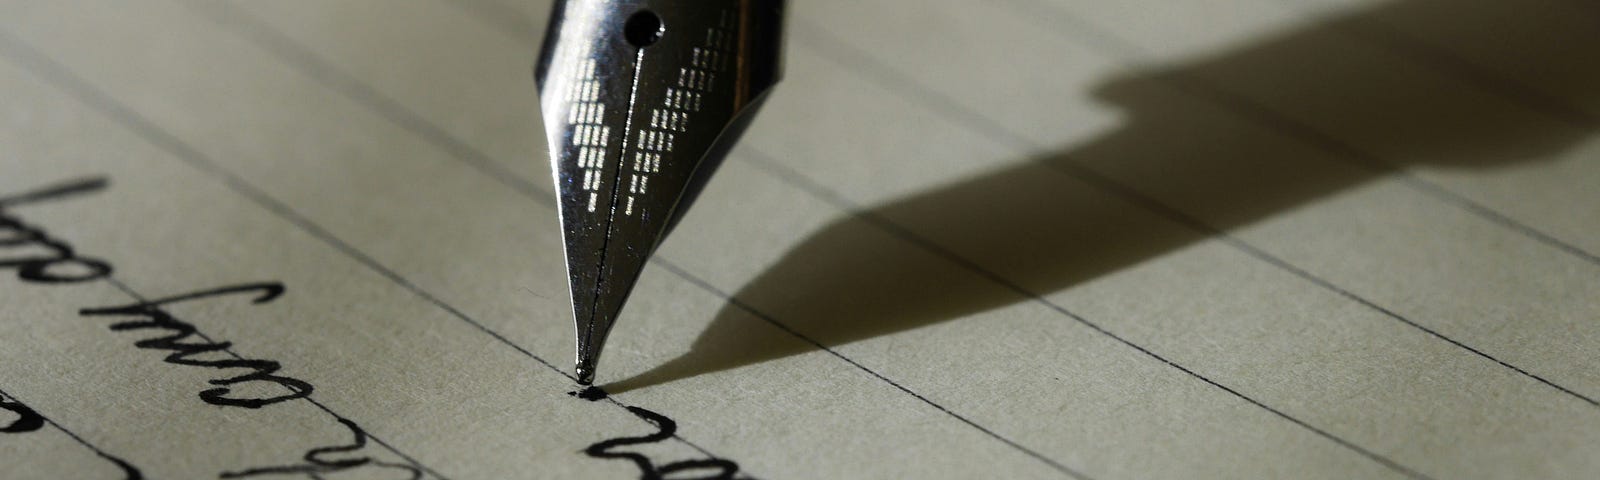 A close up of a fountain pen writing on paper